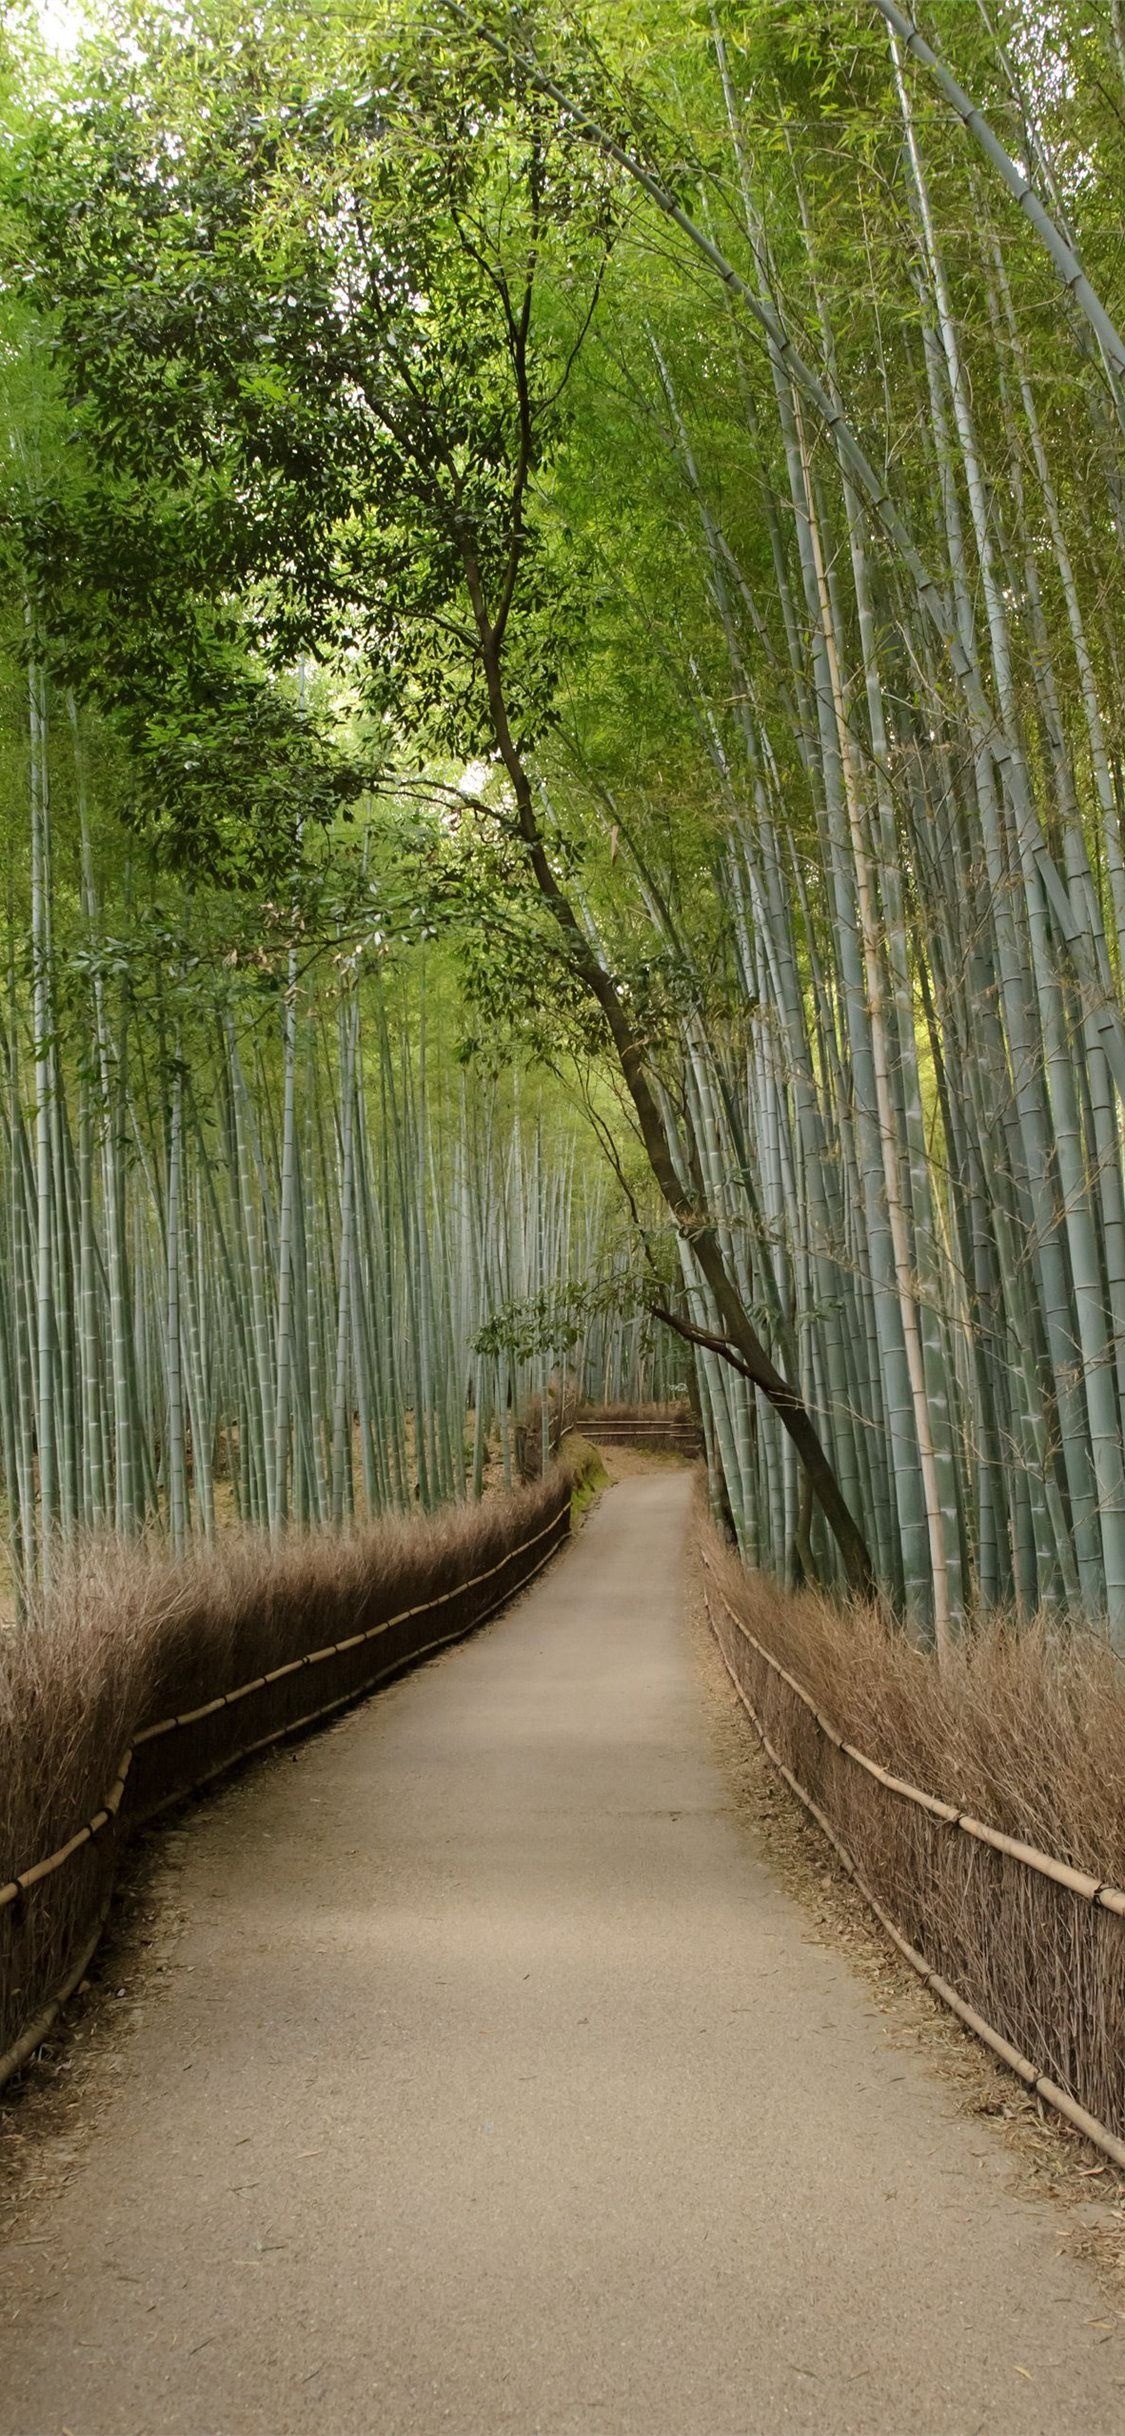 Bamboo: Sagano Bamboo Forest, Kyoto, Japan, The plant that is particularly common in the humid tropics. 1130x2440 HD Wallpaper.